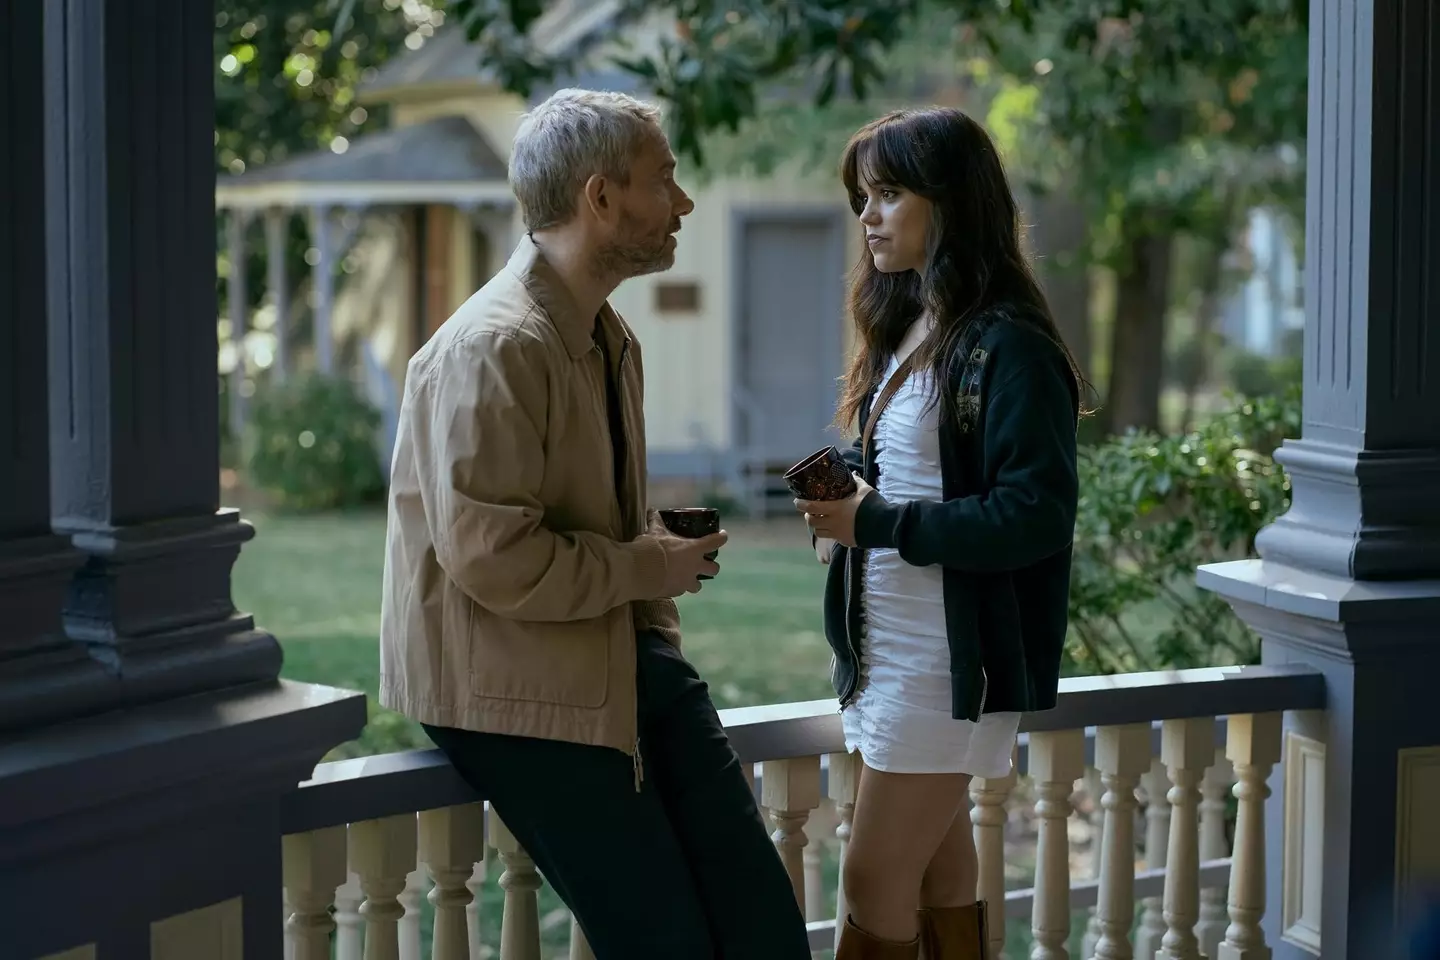 Martin Freeman and Jenna Ortega are teaming up together in a new erotic drama.